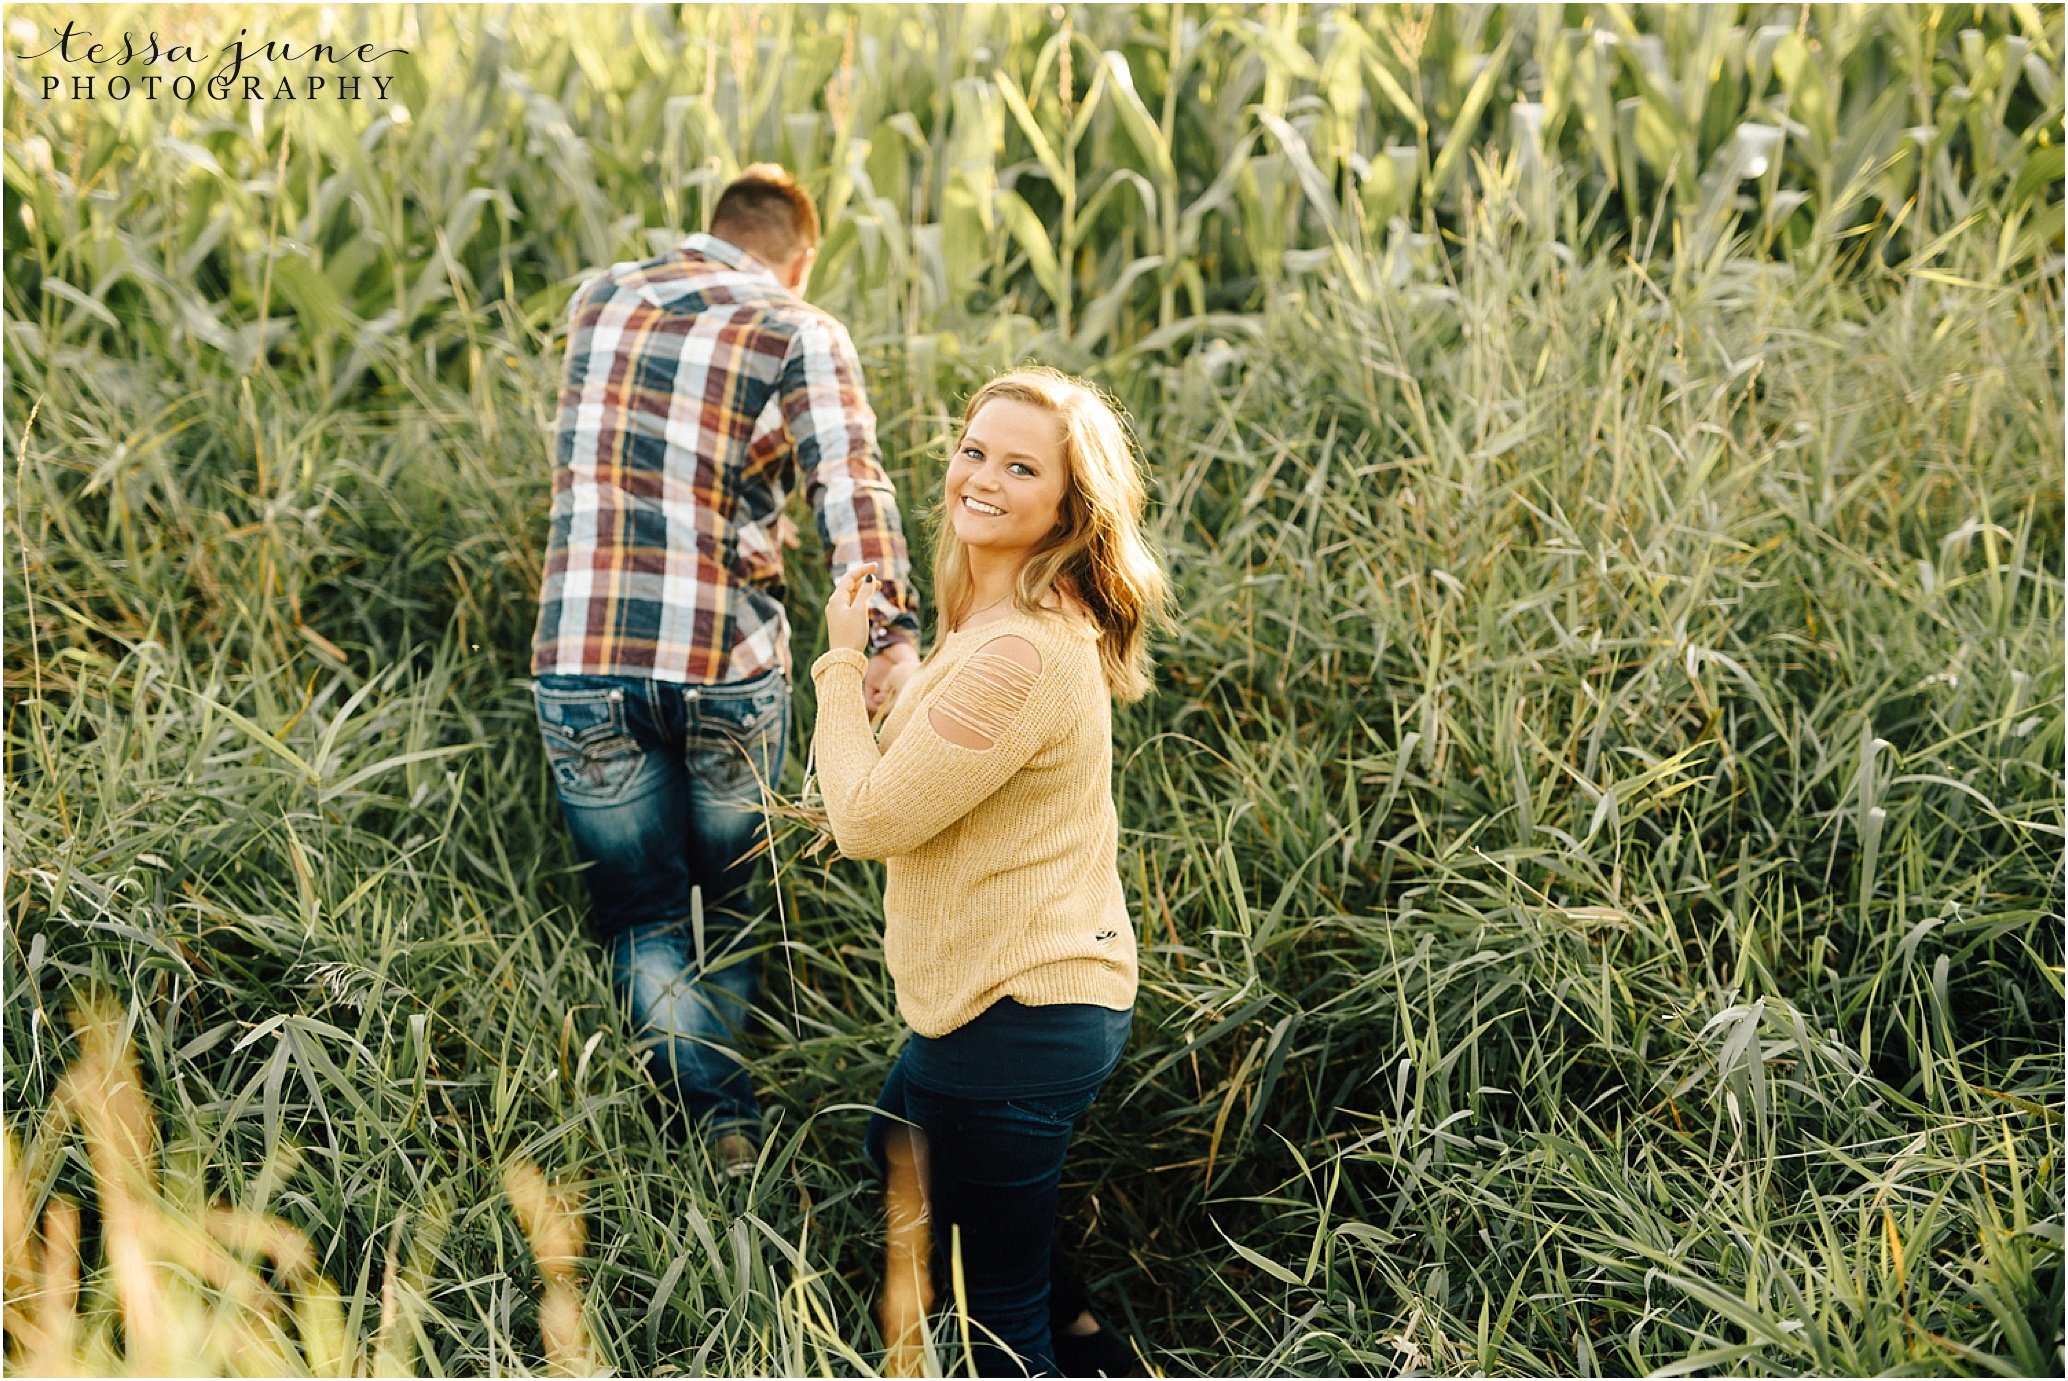 st-cloud-wedding-photographer-engagement-session-with-old-truck-14.jpeg